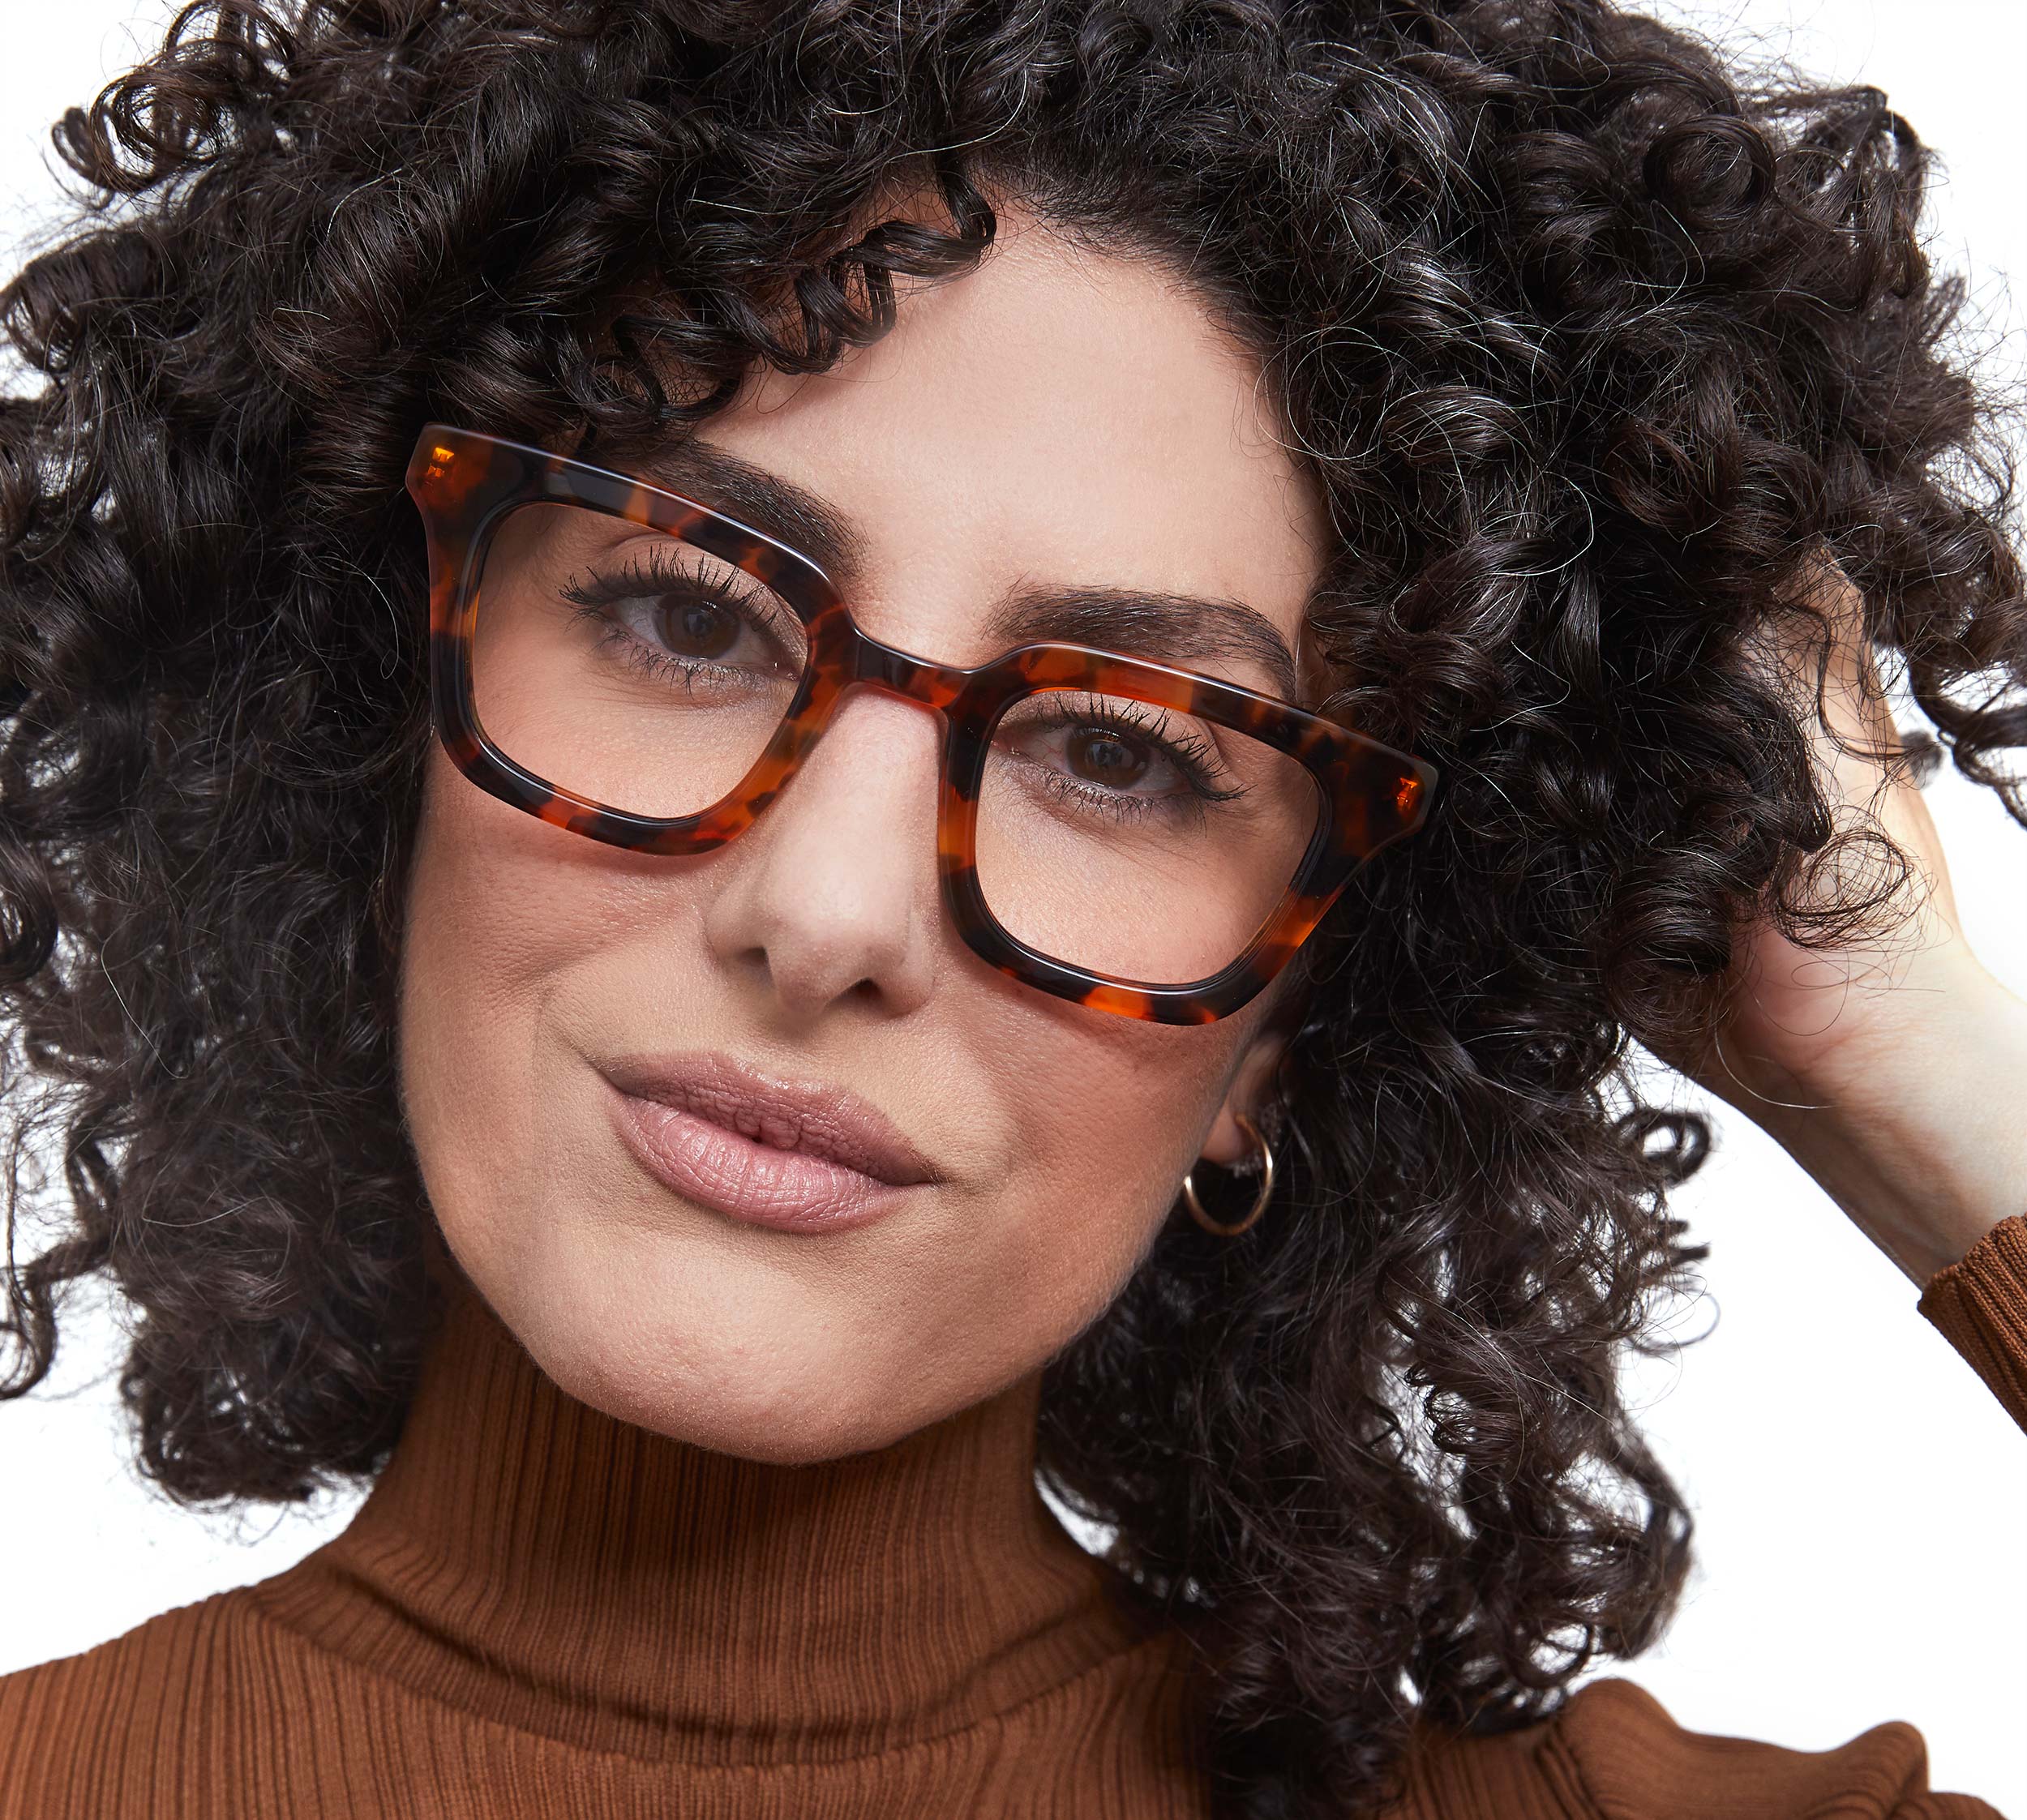 Photo of a man or woman wearing Ysée Honey Reading Glasses by French Kiwis